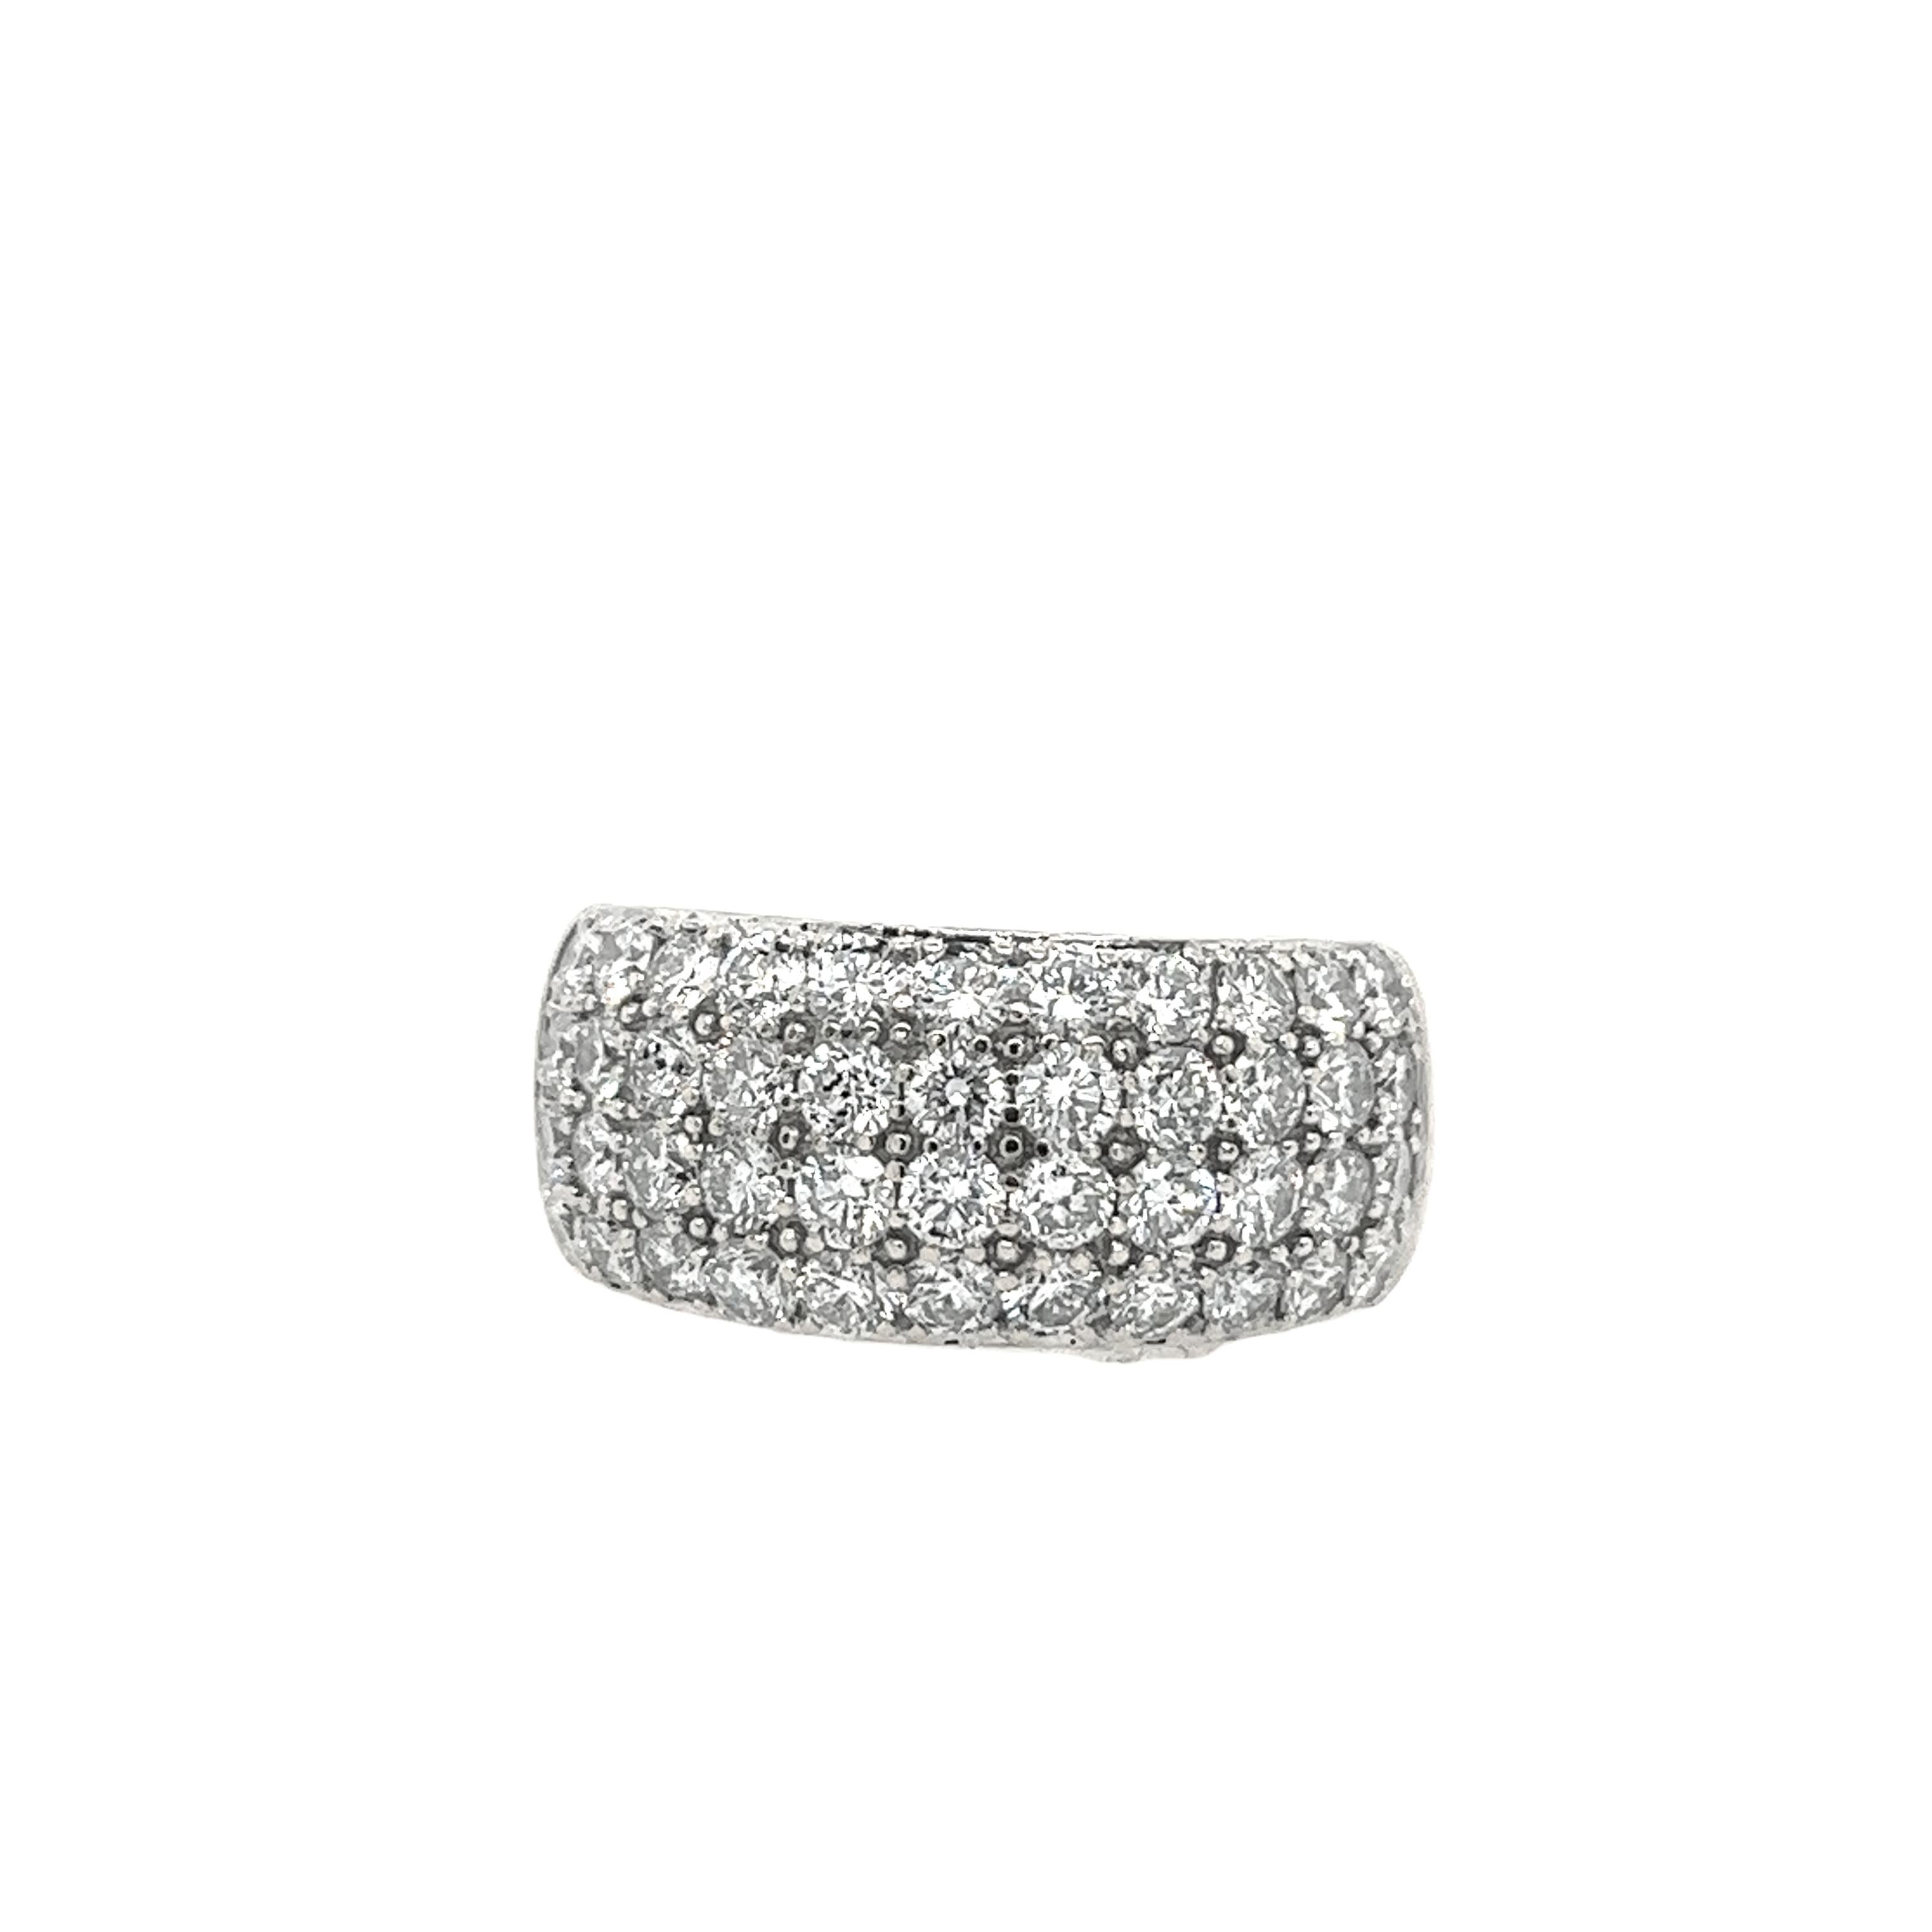 An elegant and unique diamond dress ring 4-row round brilliant cut diamond ring 
set in 18ct white gold setting, with a total diamond weight of 2.25ct.
Total Diamond Weight: 2.25ct
Diamond Colour: G/H
Diamond Clarity: SI1
Width of Band: 4.95mm
Width